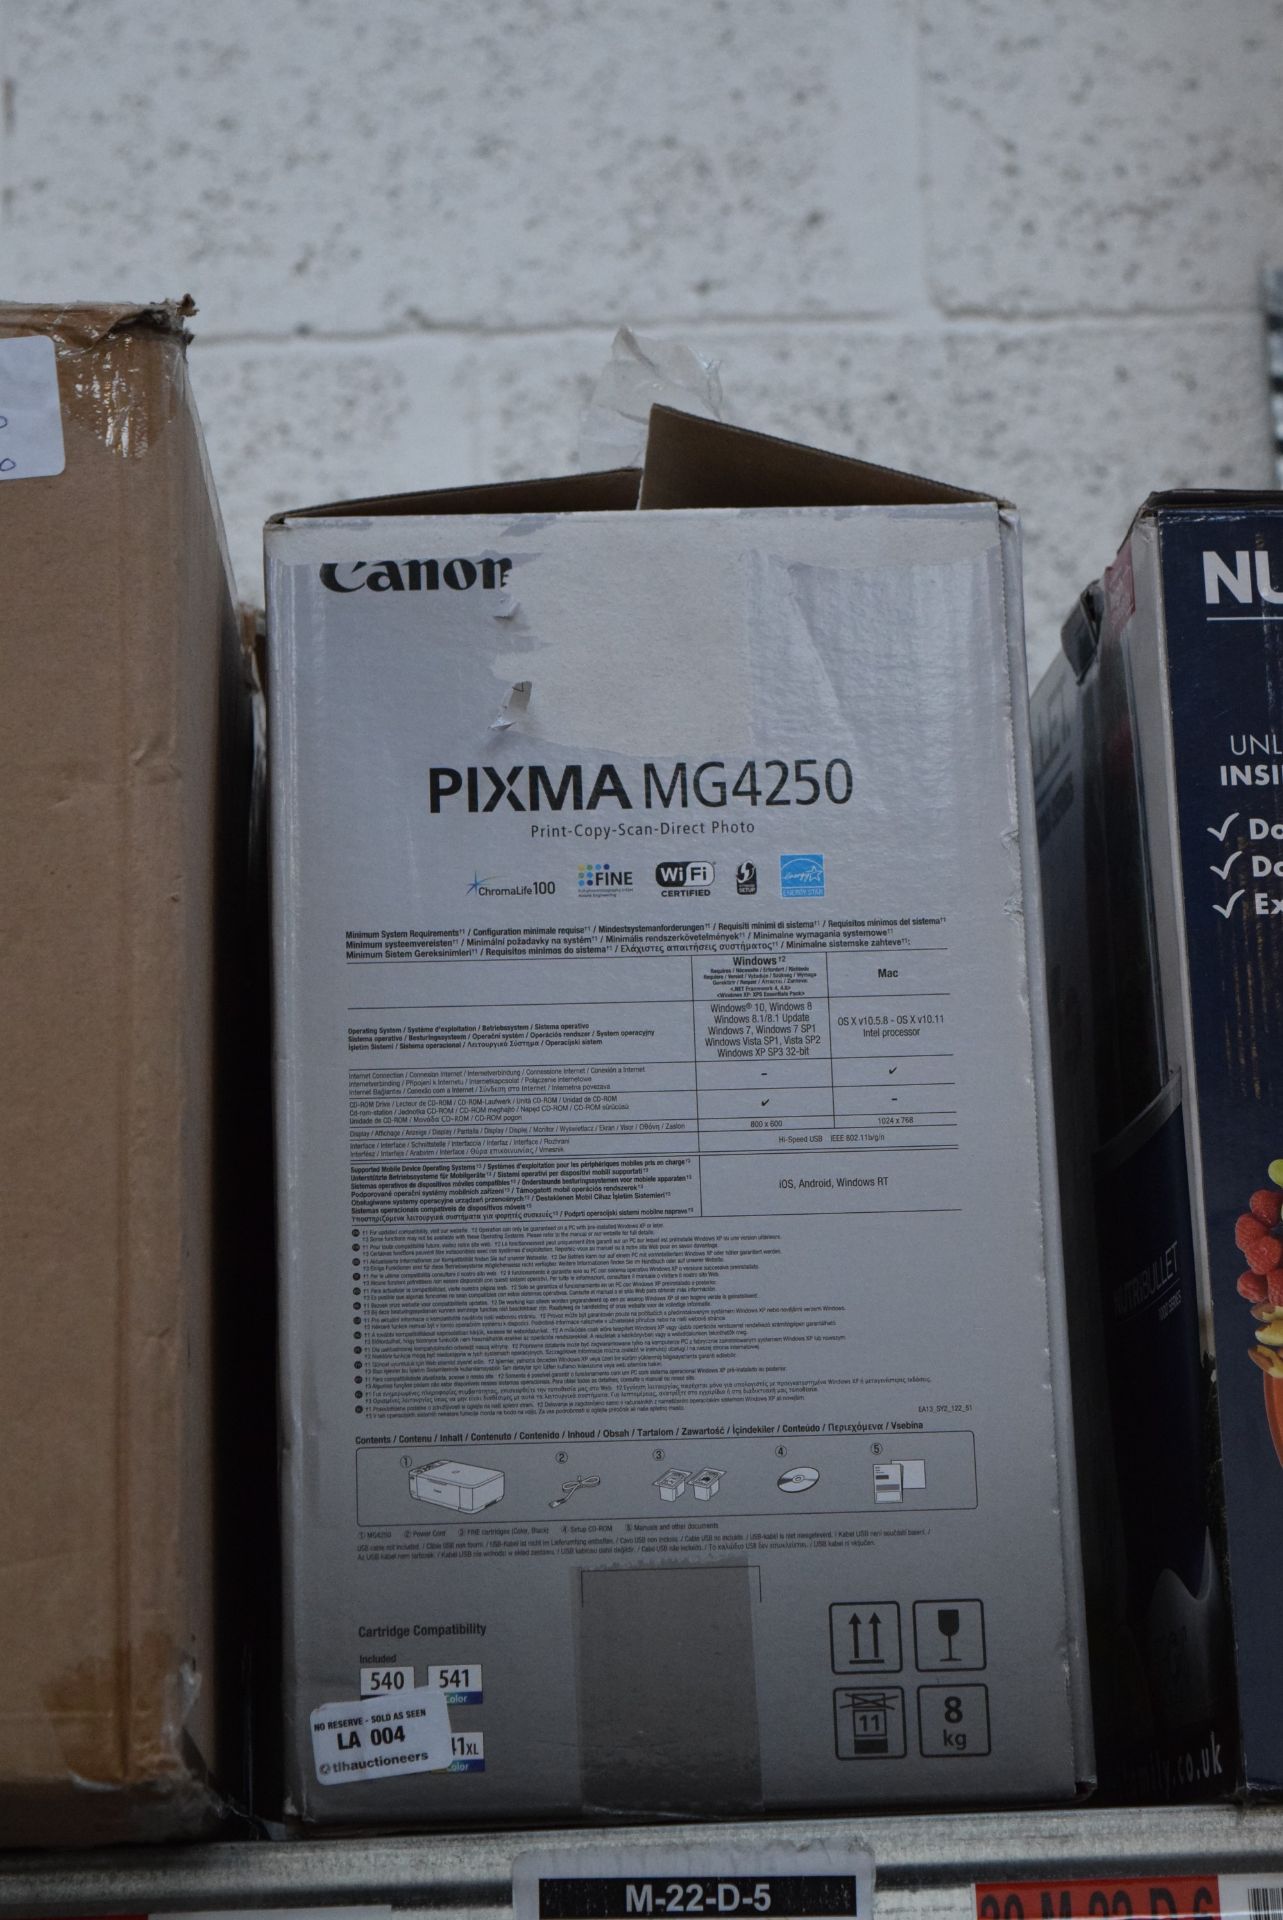 1 x BOXED CANON PIXMA 4250 WIRELESS ALL IN ONE PRINTER RRP £55 05.02.18 227244 *PLEASE NOTE THAT THE